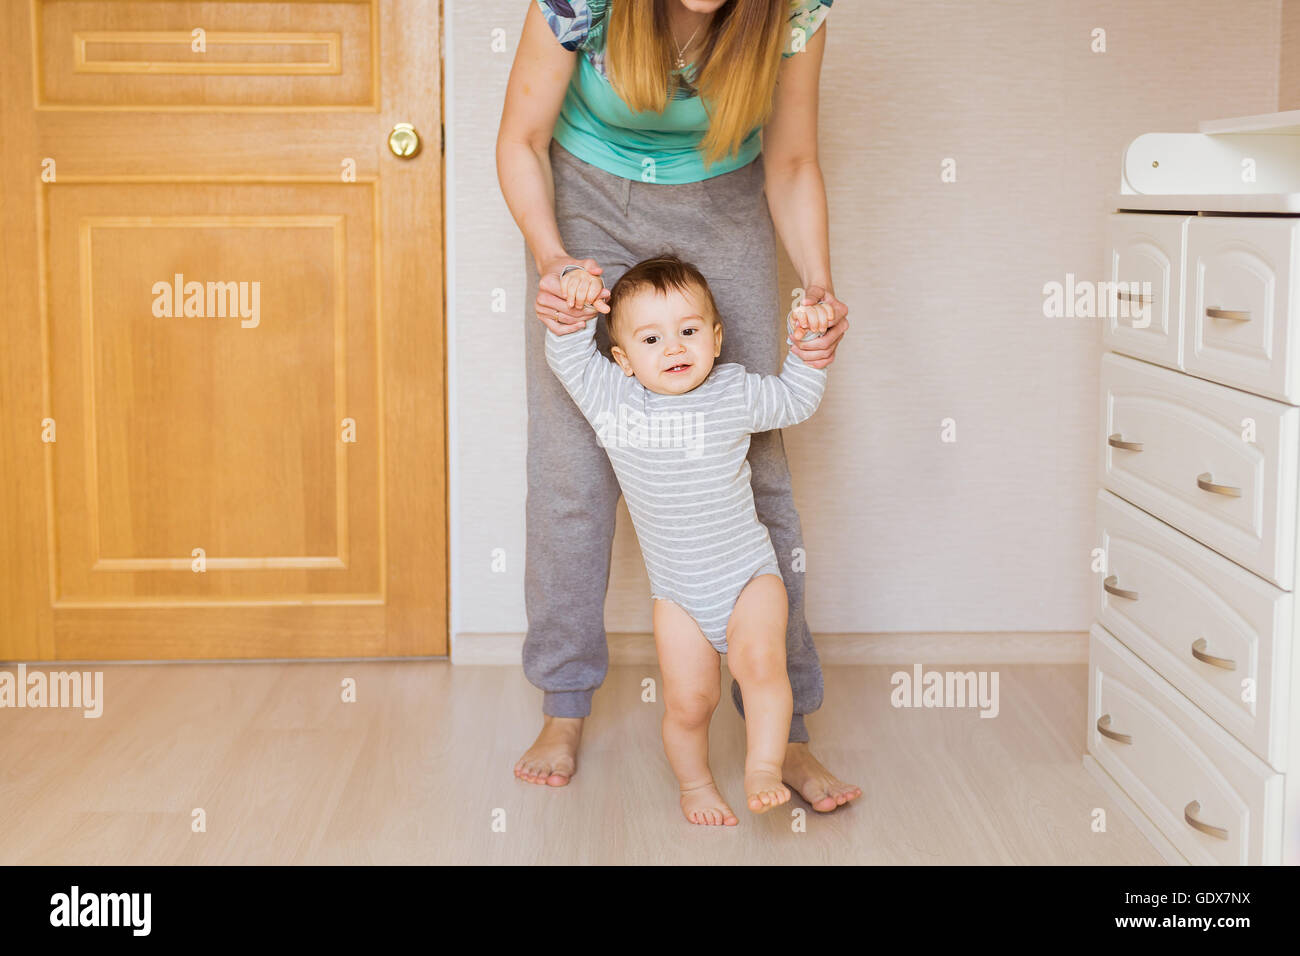 Cute smiling baby boy learning to walk Stock Photo